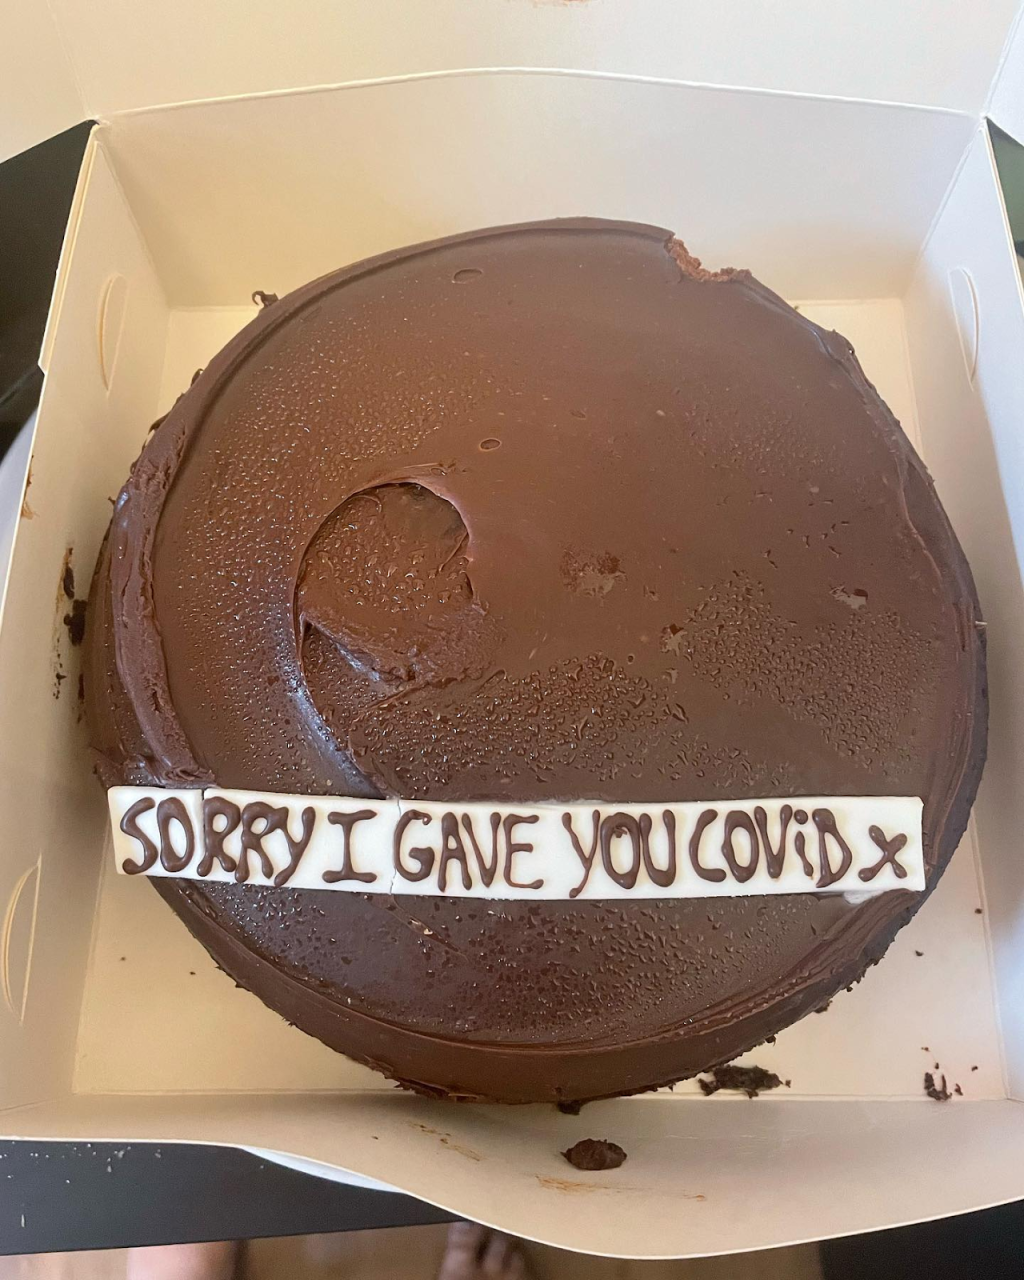 A chocolate cake that says "Sorry I gave you COVID x"